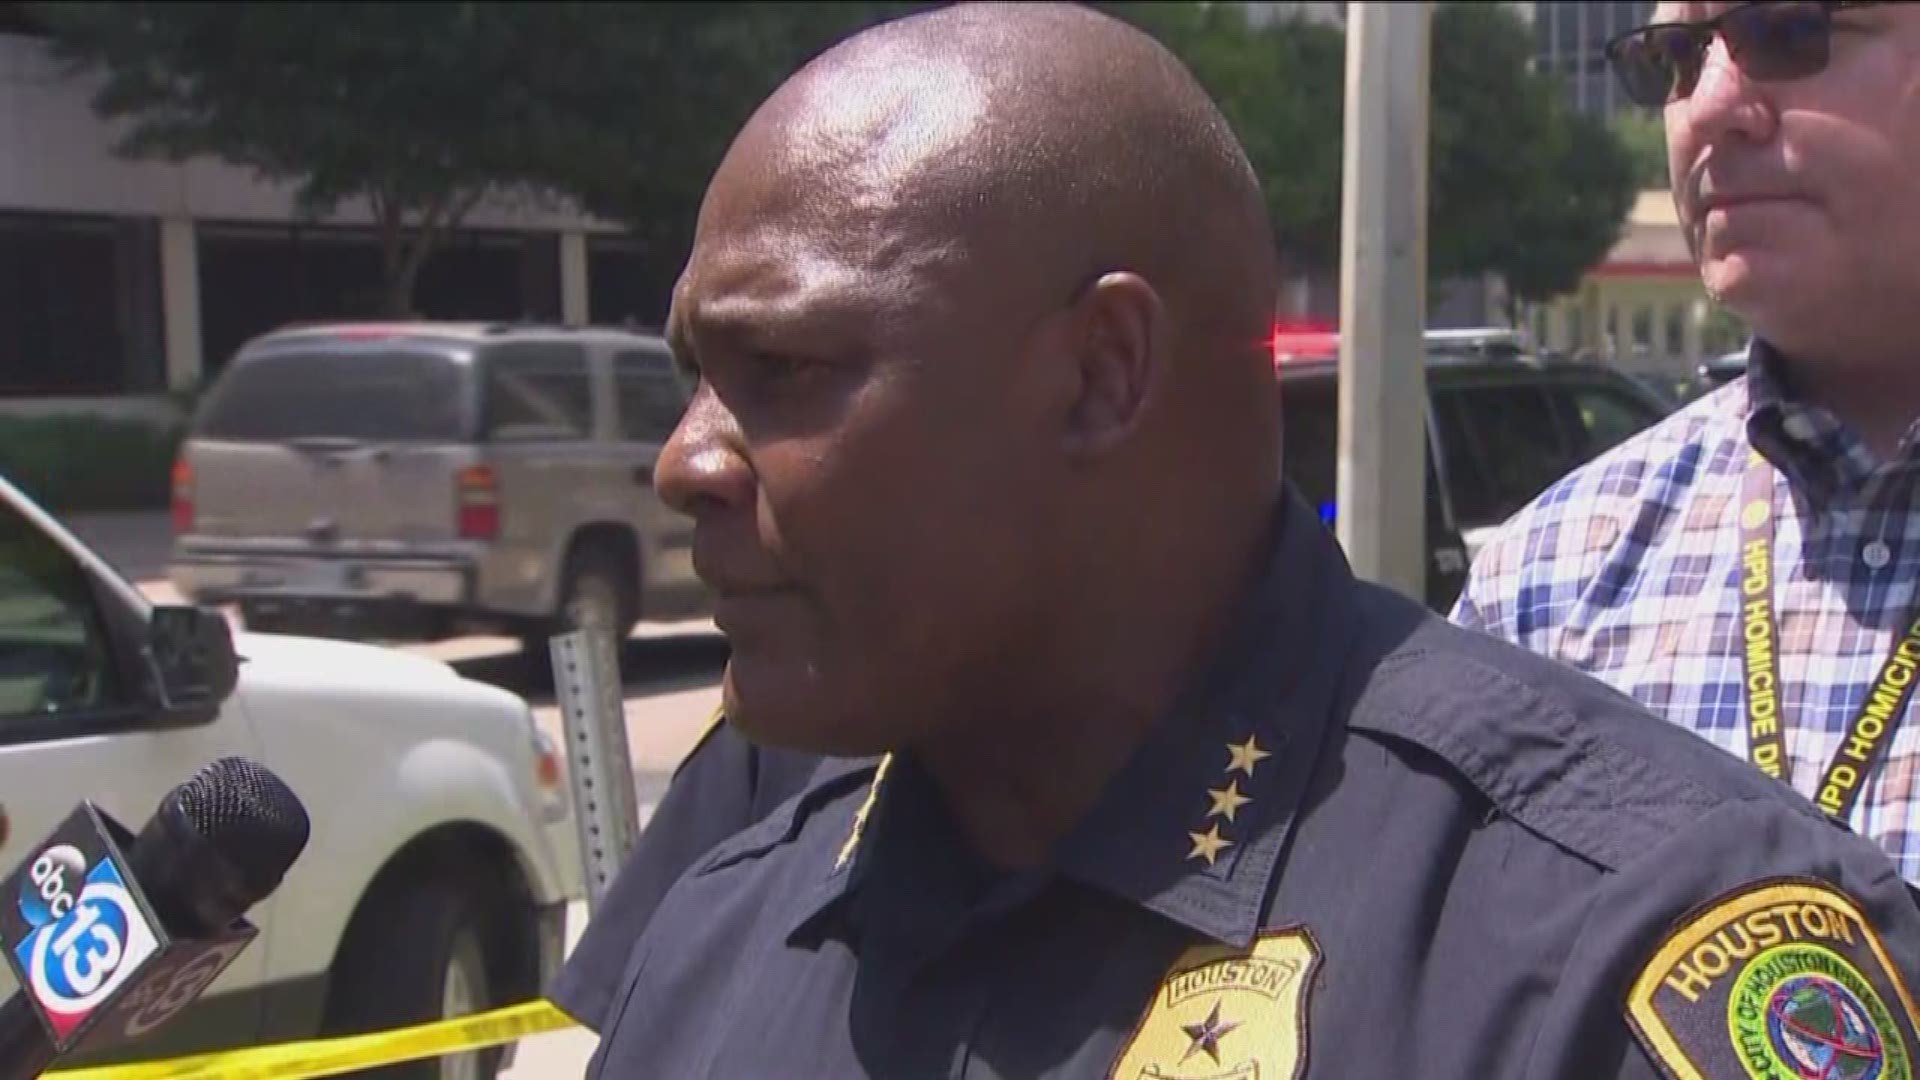 Houston police holding a press conference after man was fatally shot while riding bike on Main Street.